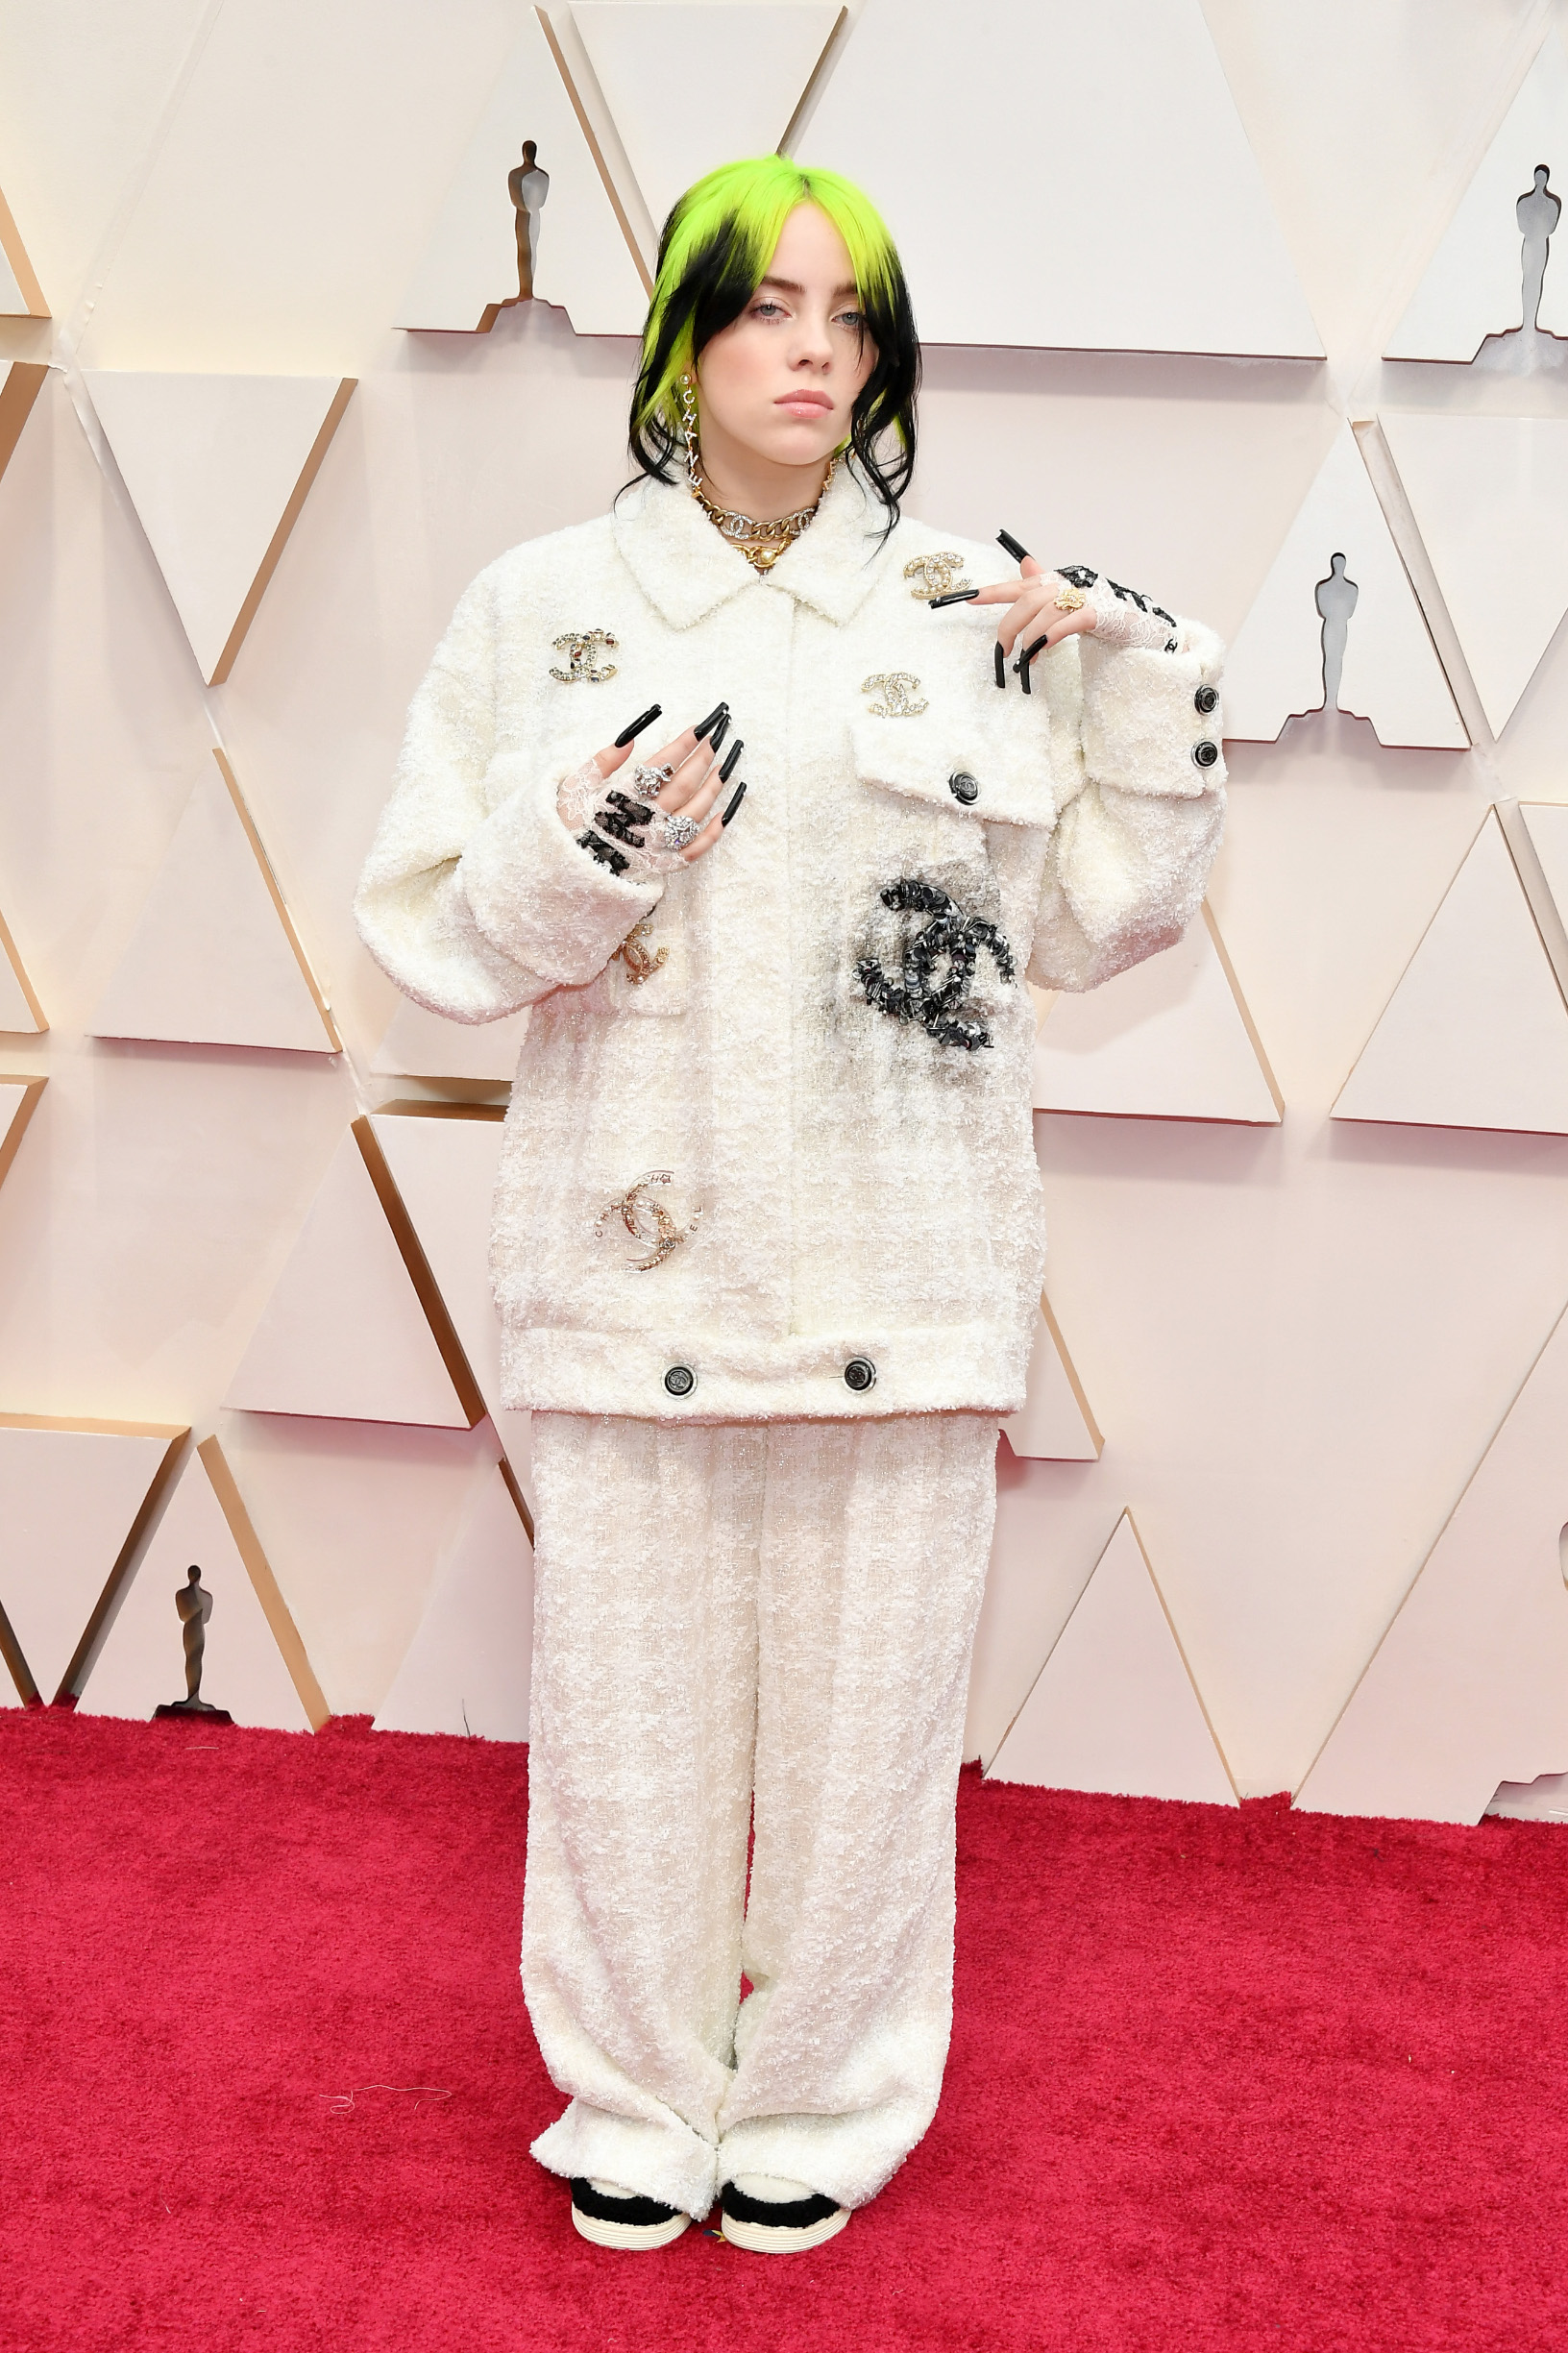 HOLLYWOOD, CALIFORNIA - FEBRUARY 09: Billie Eilish attends the 92nd Annual Academy Awards at Hollywood and Highland on February 09, 2020 in Hollywood, California. (Photo by Amy Sussman/Getty Images)